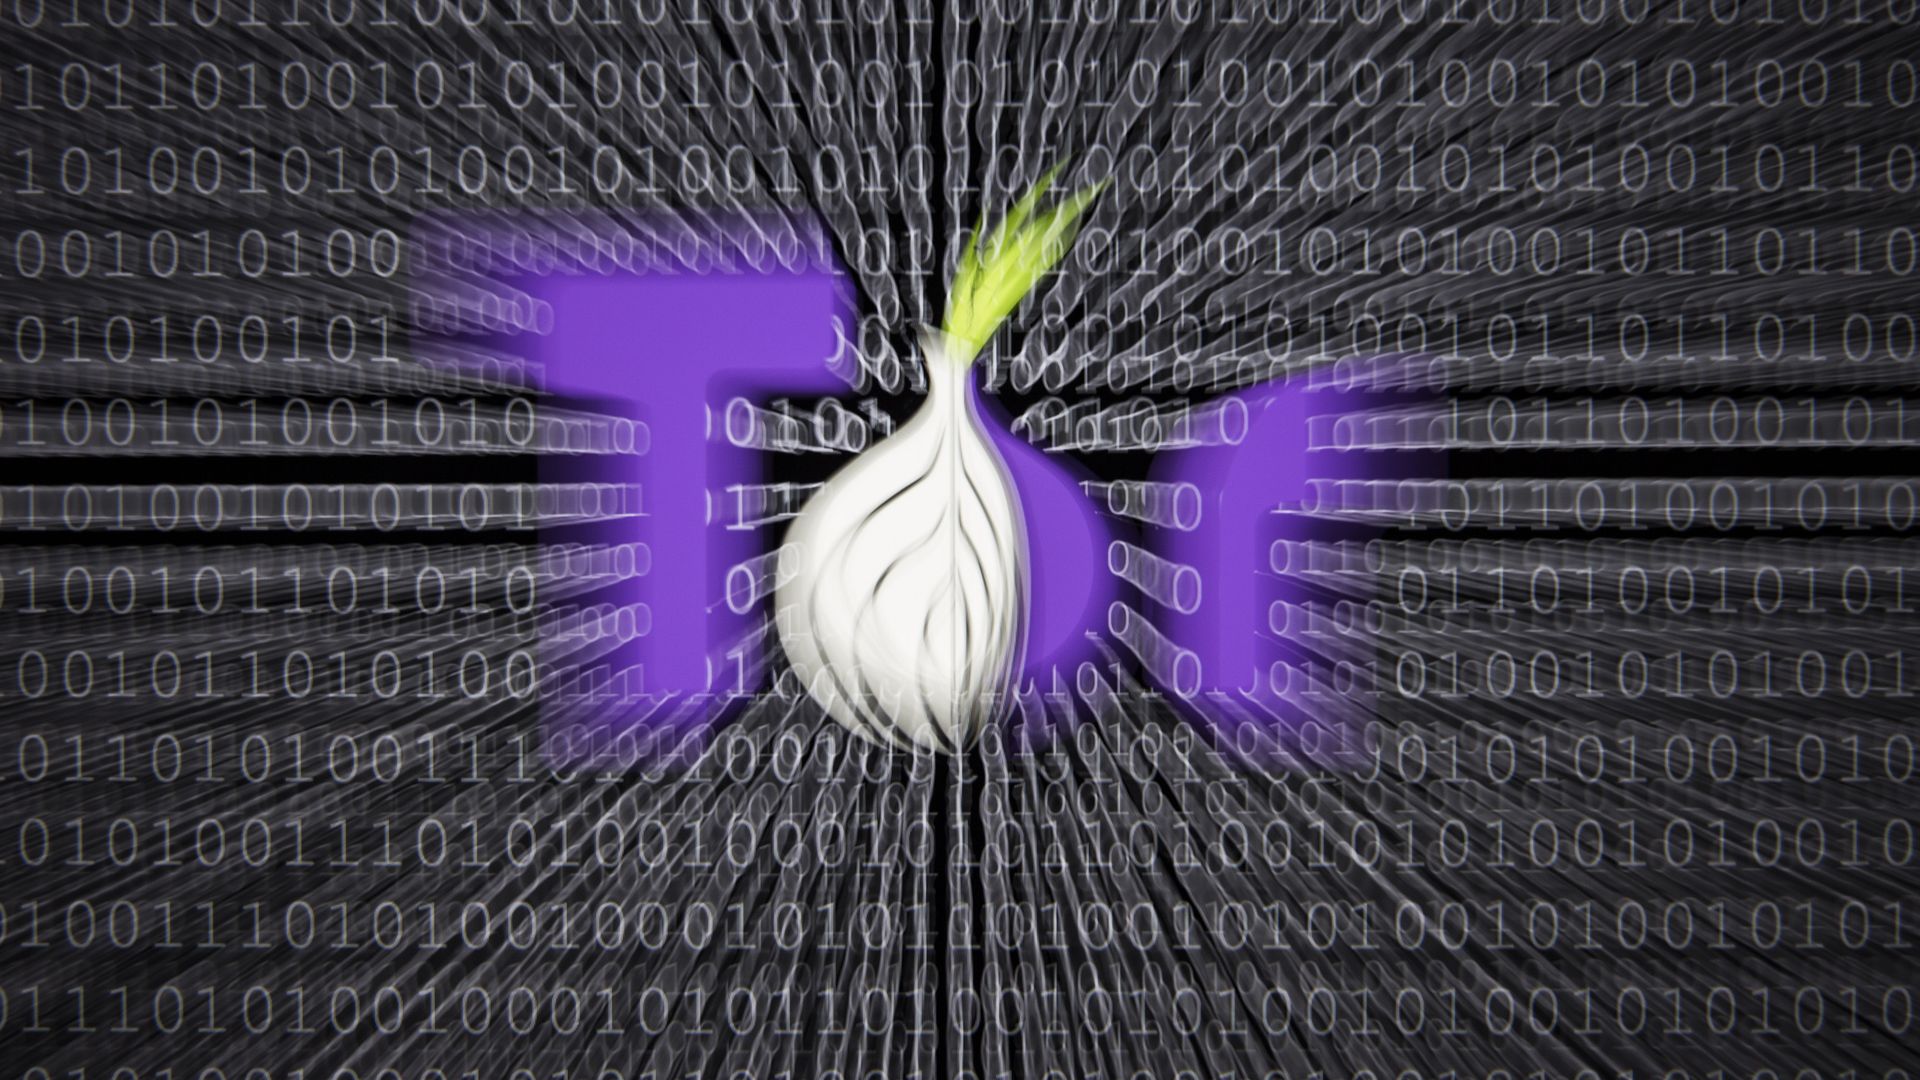 An illustration of Tor, the illegal browsing site with a binary 0101010 background. 